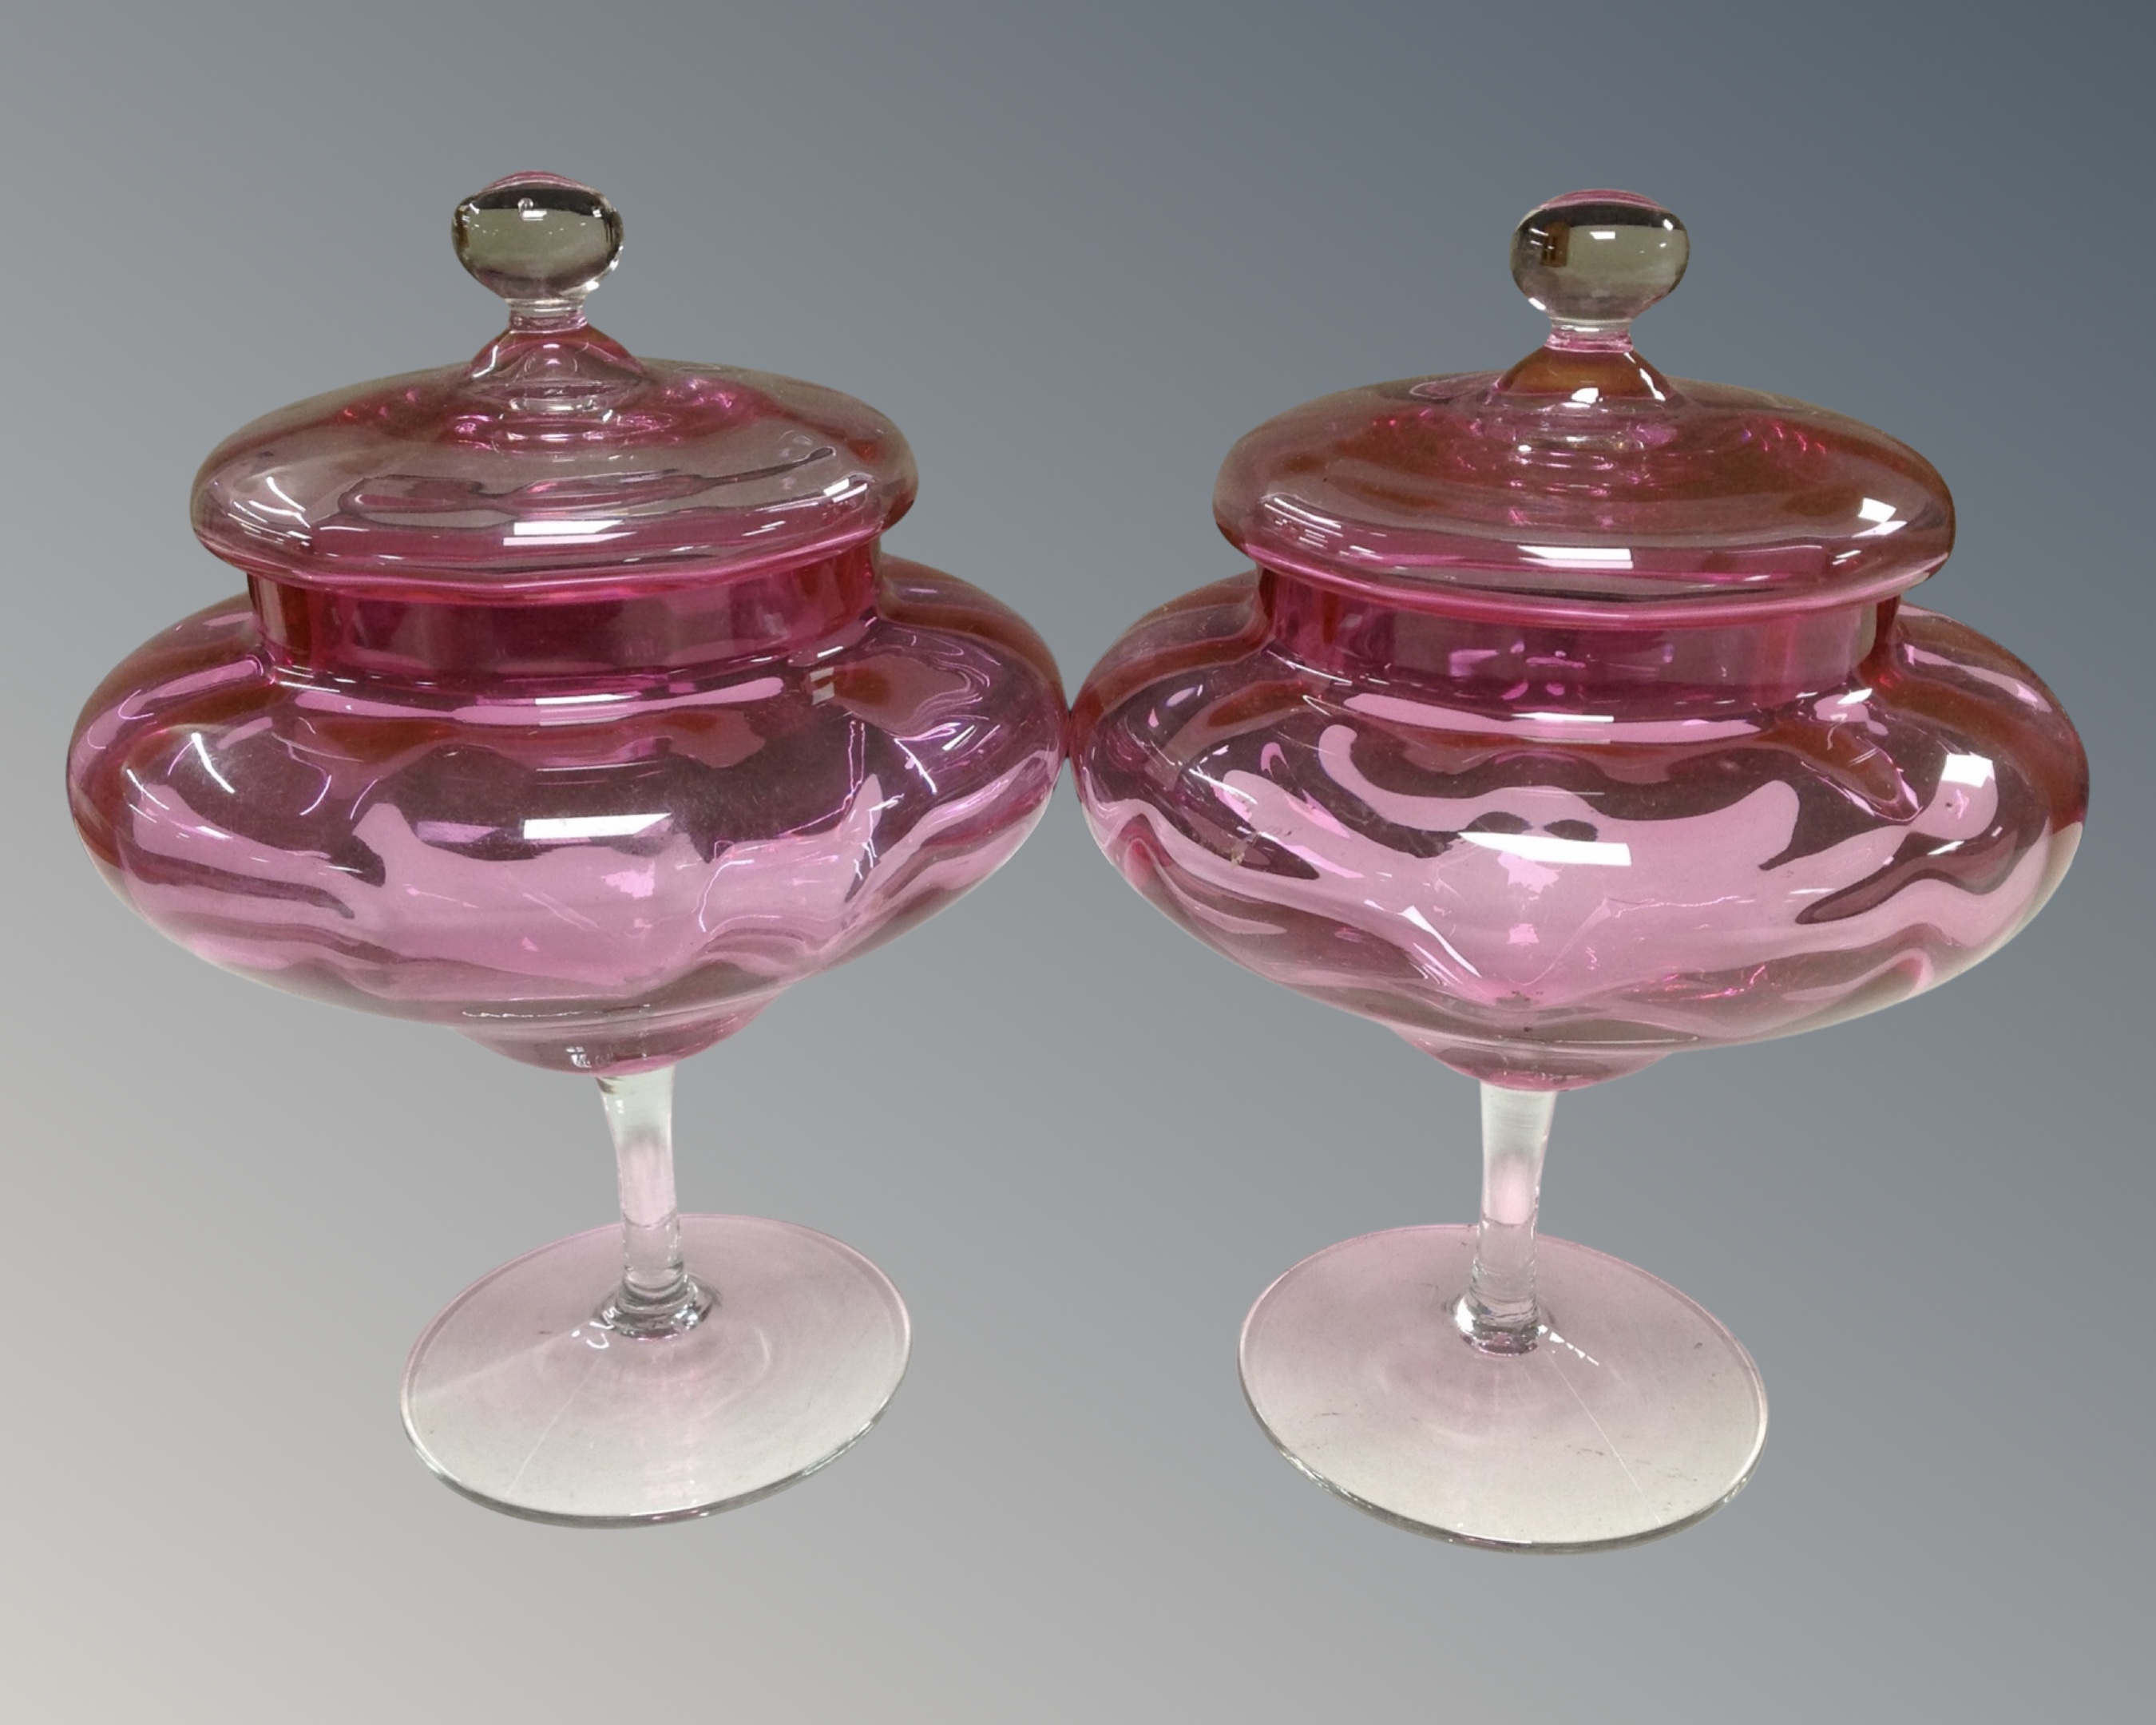 Two antique cranberry glass jugs together with a pair of lidded cranberry glass comports - Image 2 of 2